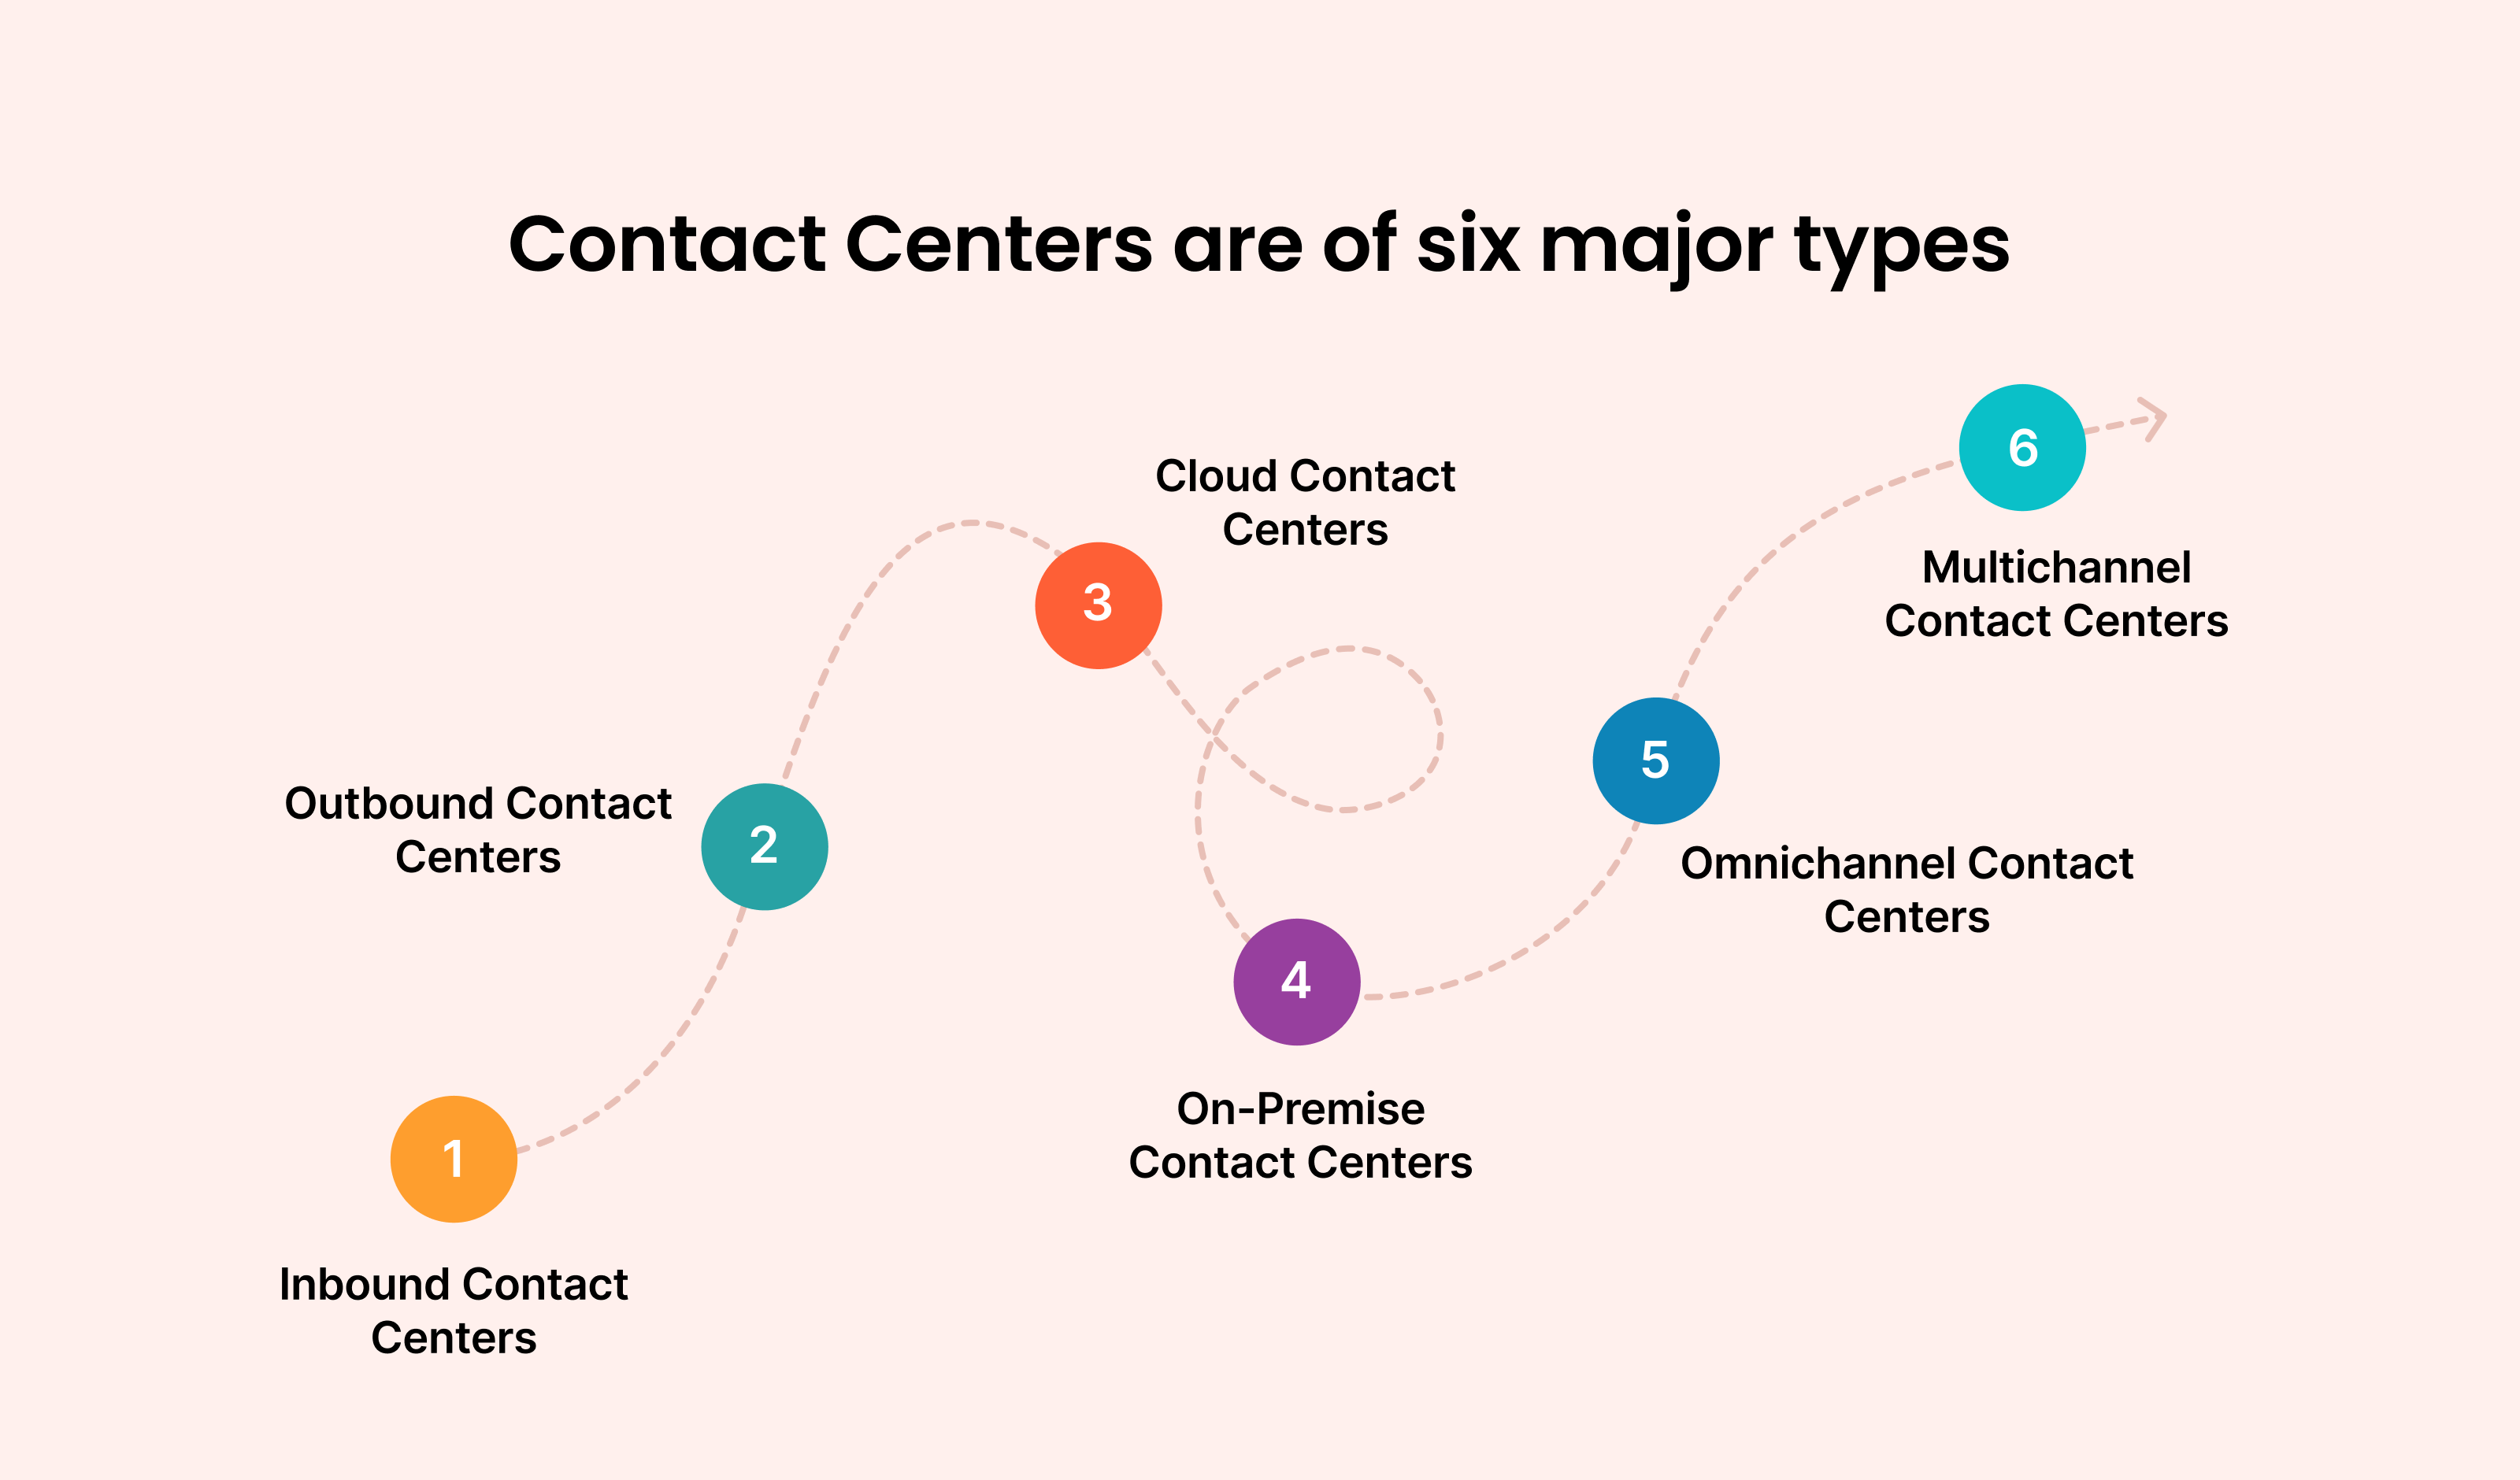 Contact Centers are of six major types: